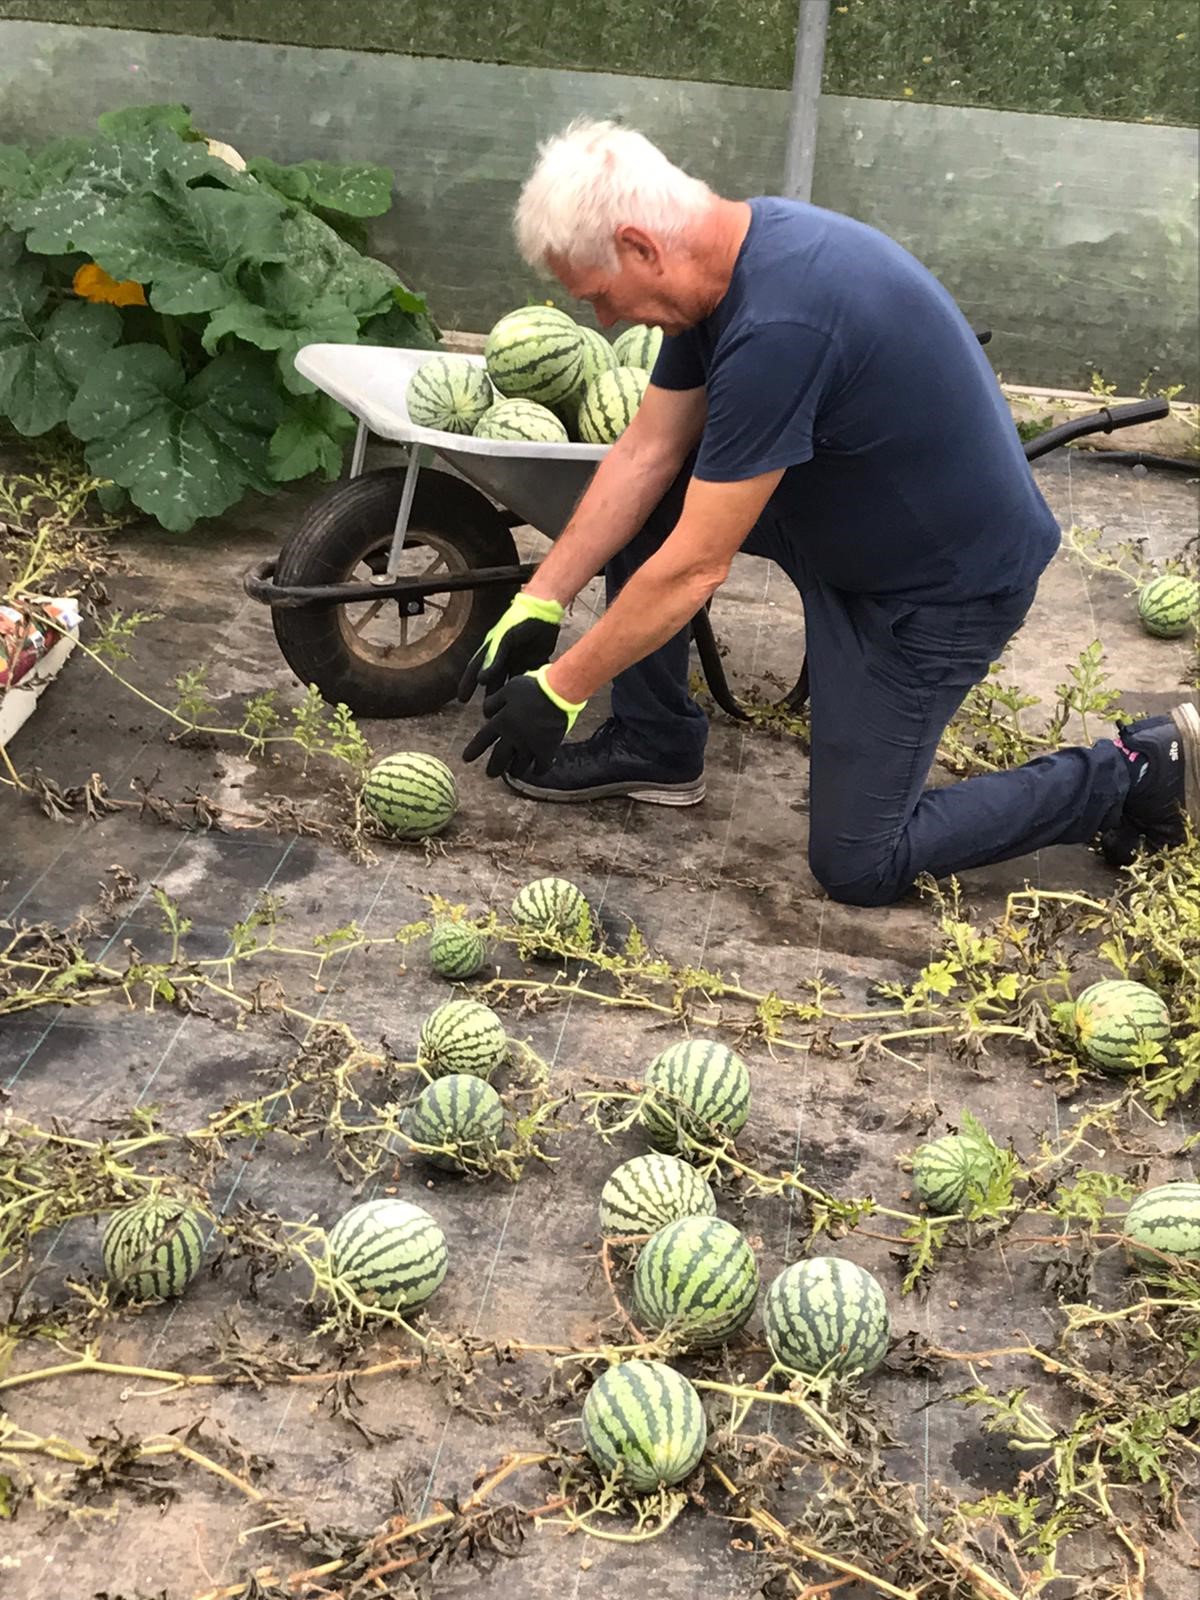 Melon harvesting supervisor Paul Mondey picking the watermelons, which have grown larger than normal due to the heat. (Tesco/ PA)